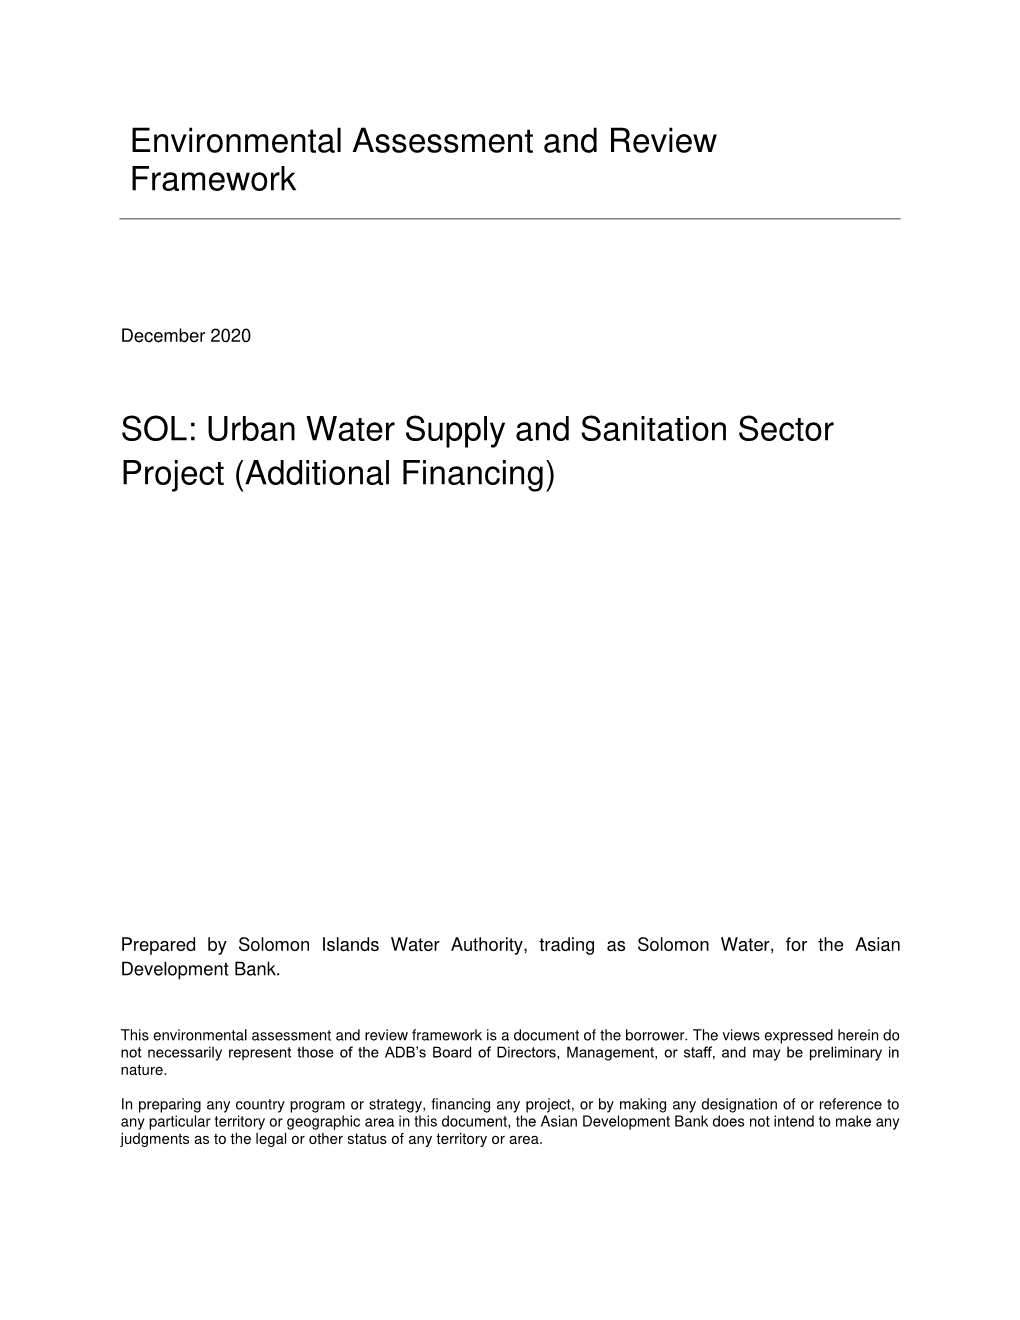 Urban Water Supply and Sanitation Sector Project (Additional Financing)